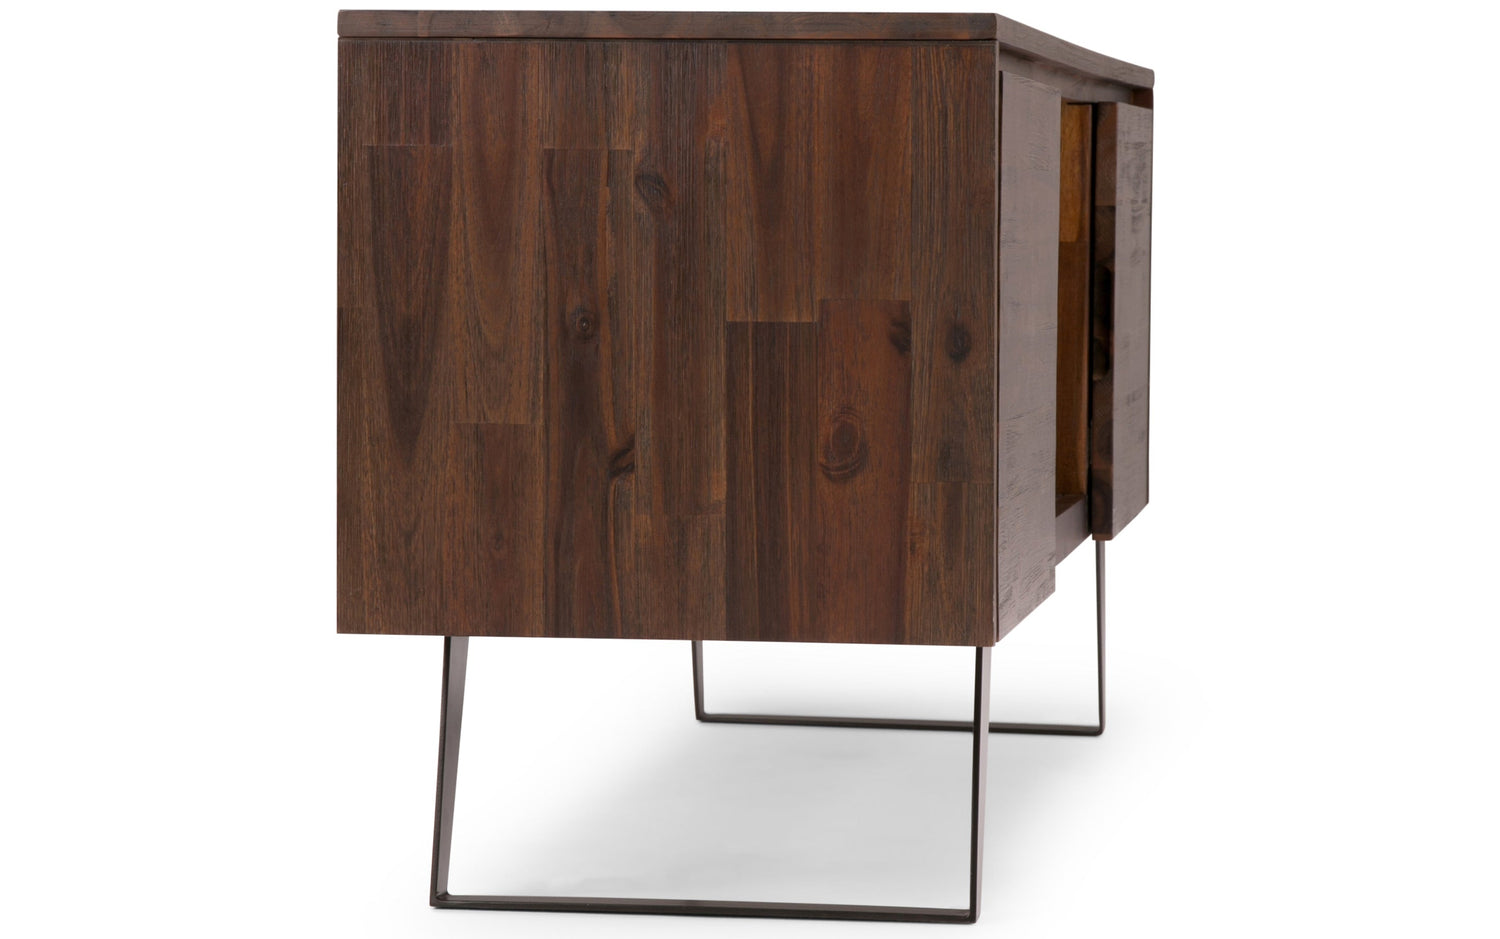 Distressed Charcoal Brown Acacia | Lowry Solid Acacia Wood Wide TV Media Stand For TVs up to 70 Inches